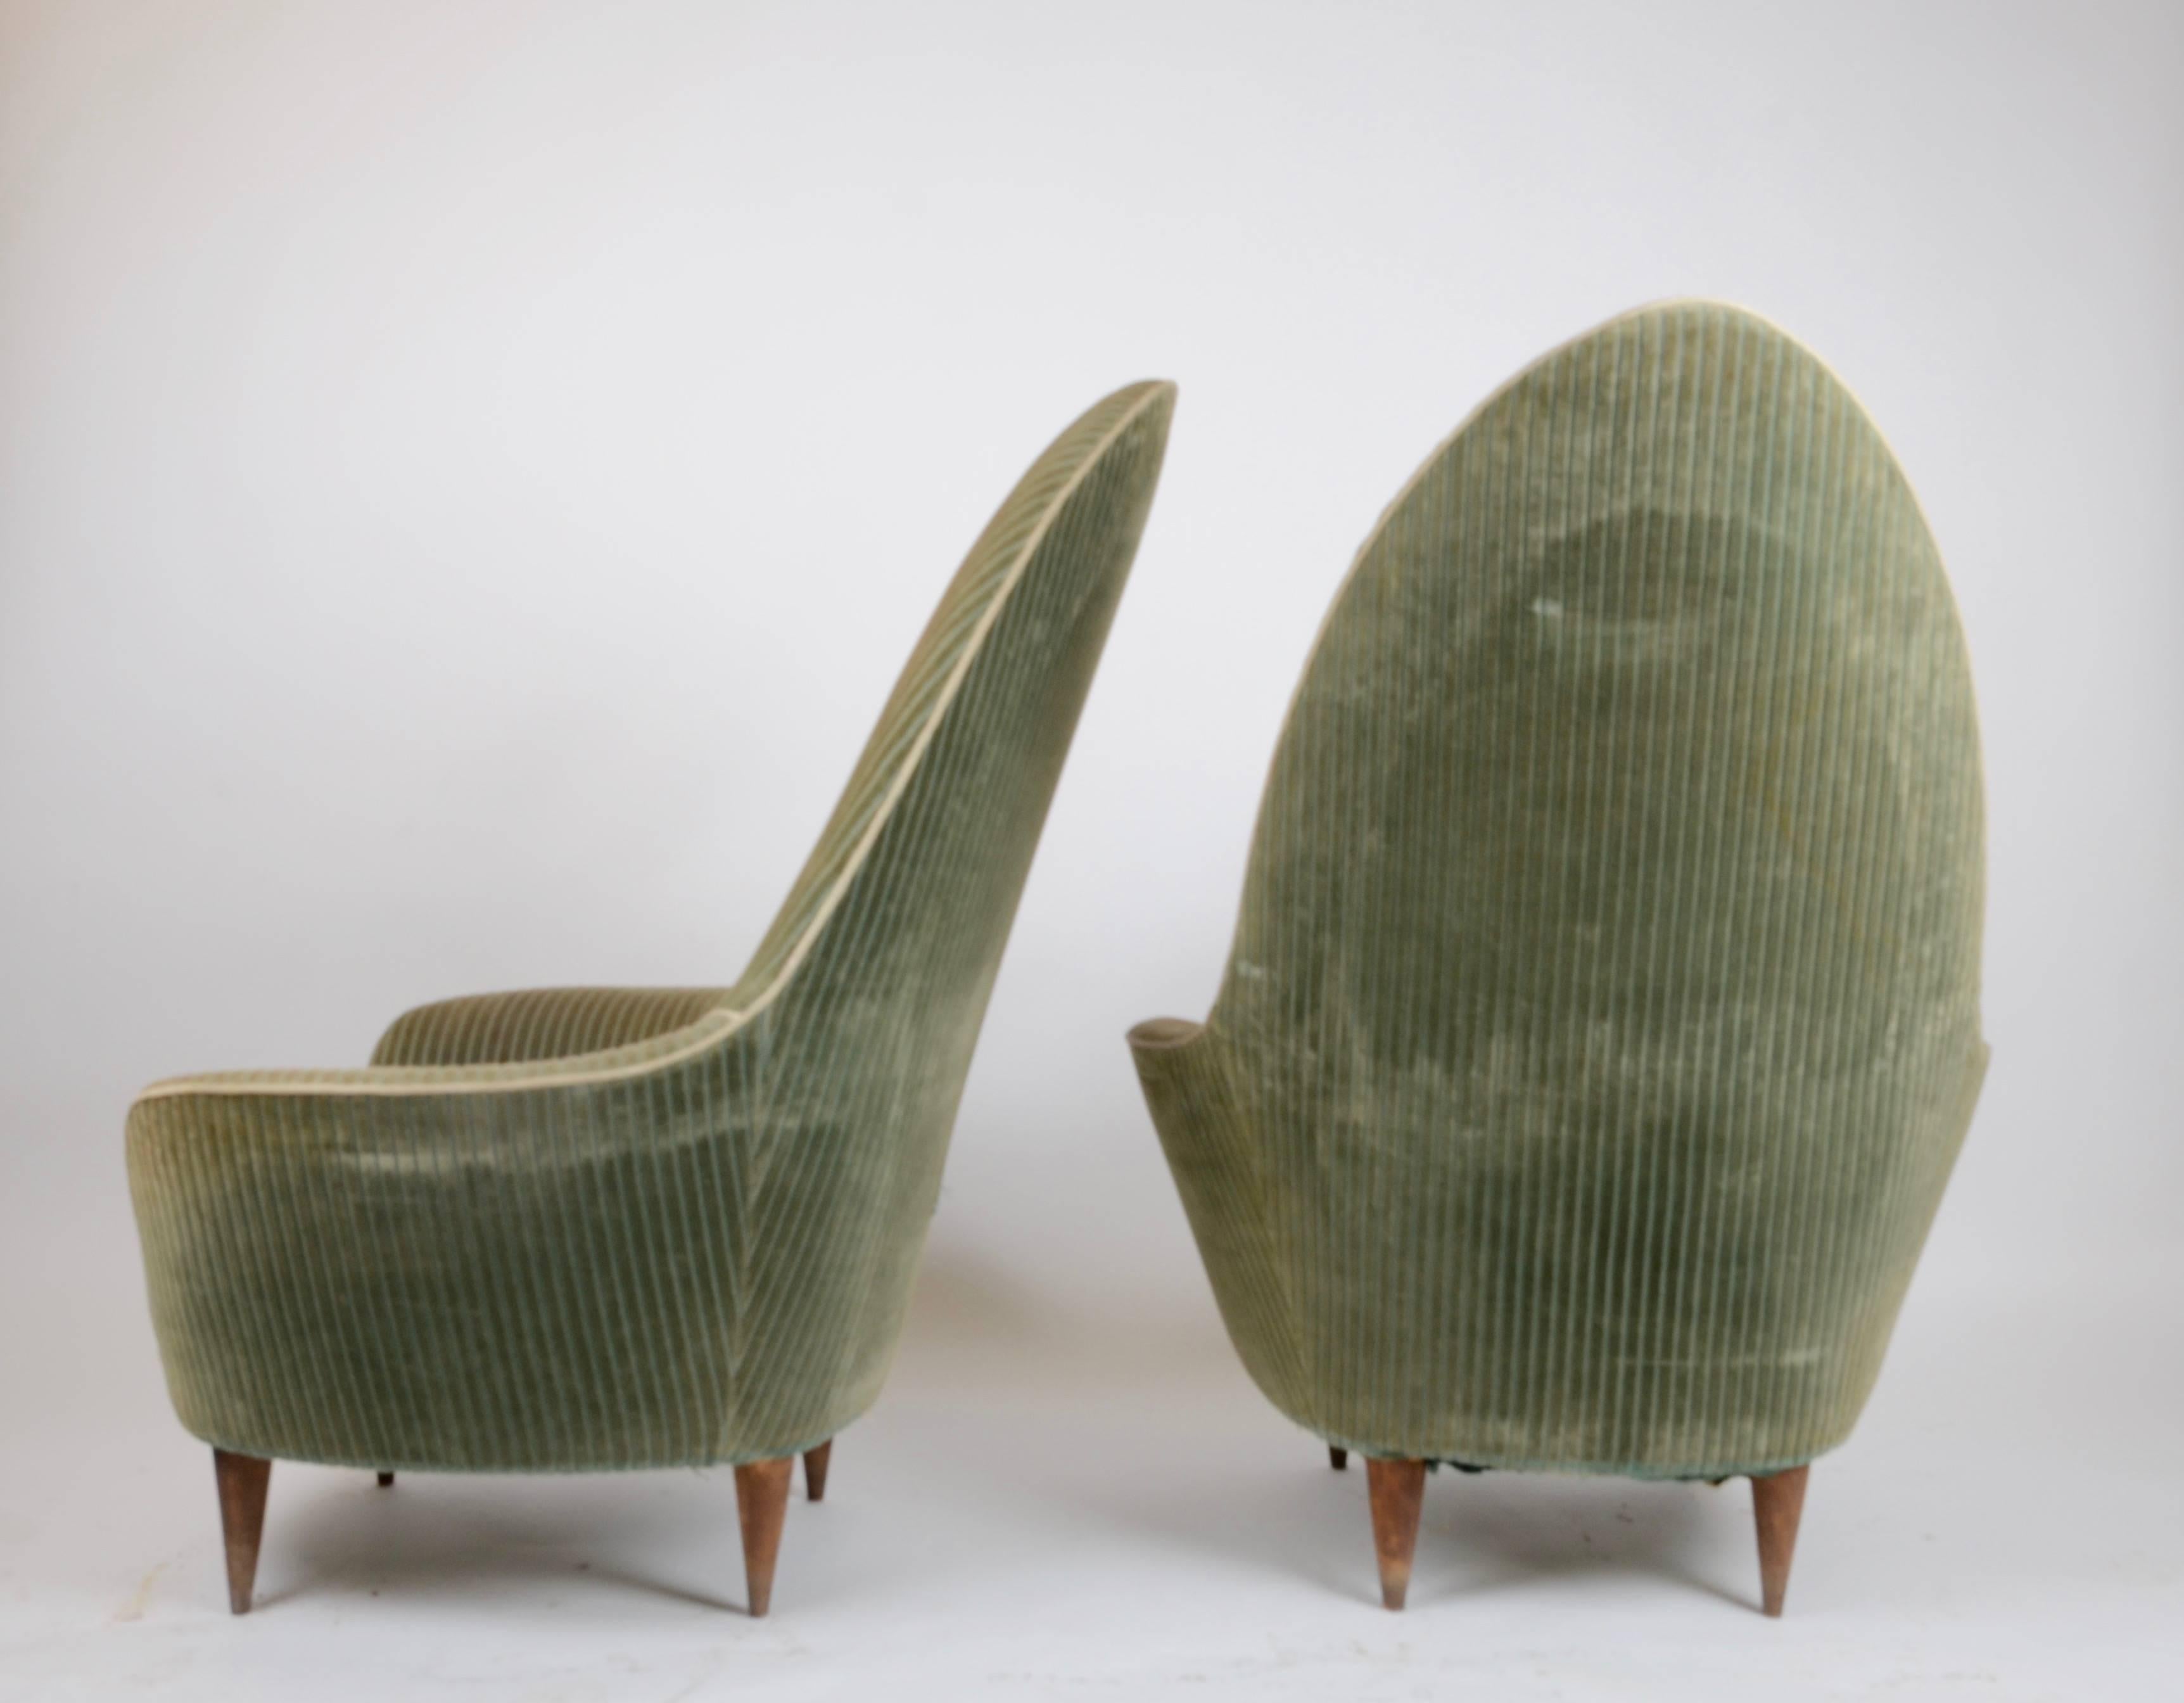 A pair of lounge chairs, attributed Ico Parisi, Italian, 1950s.